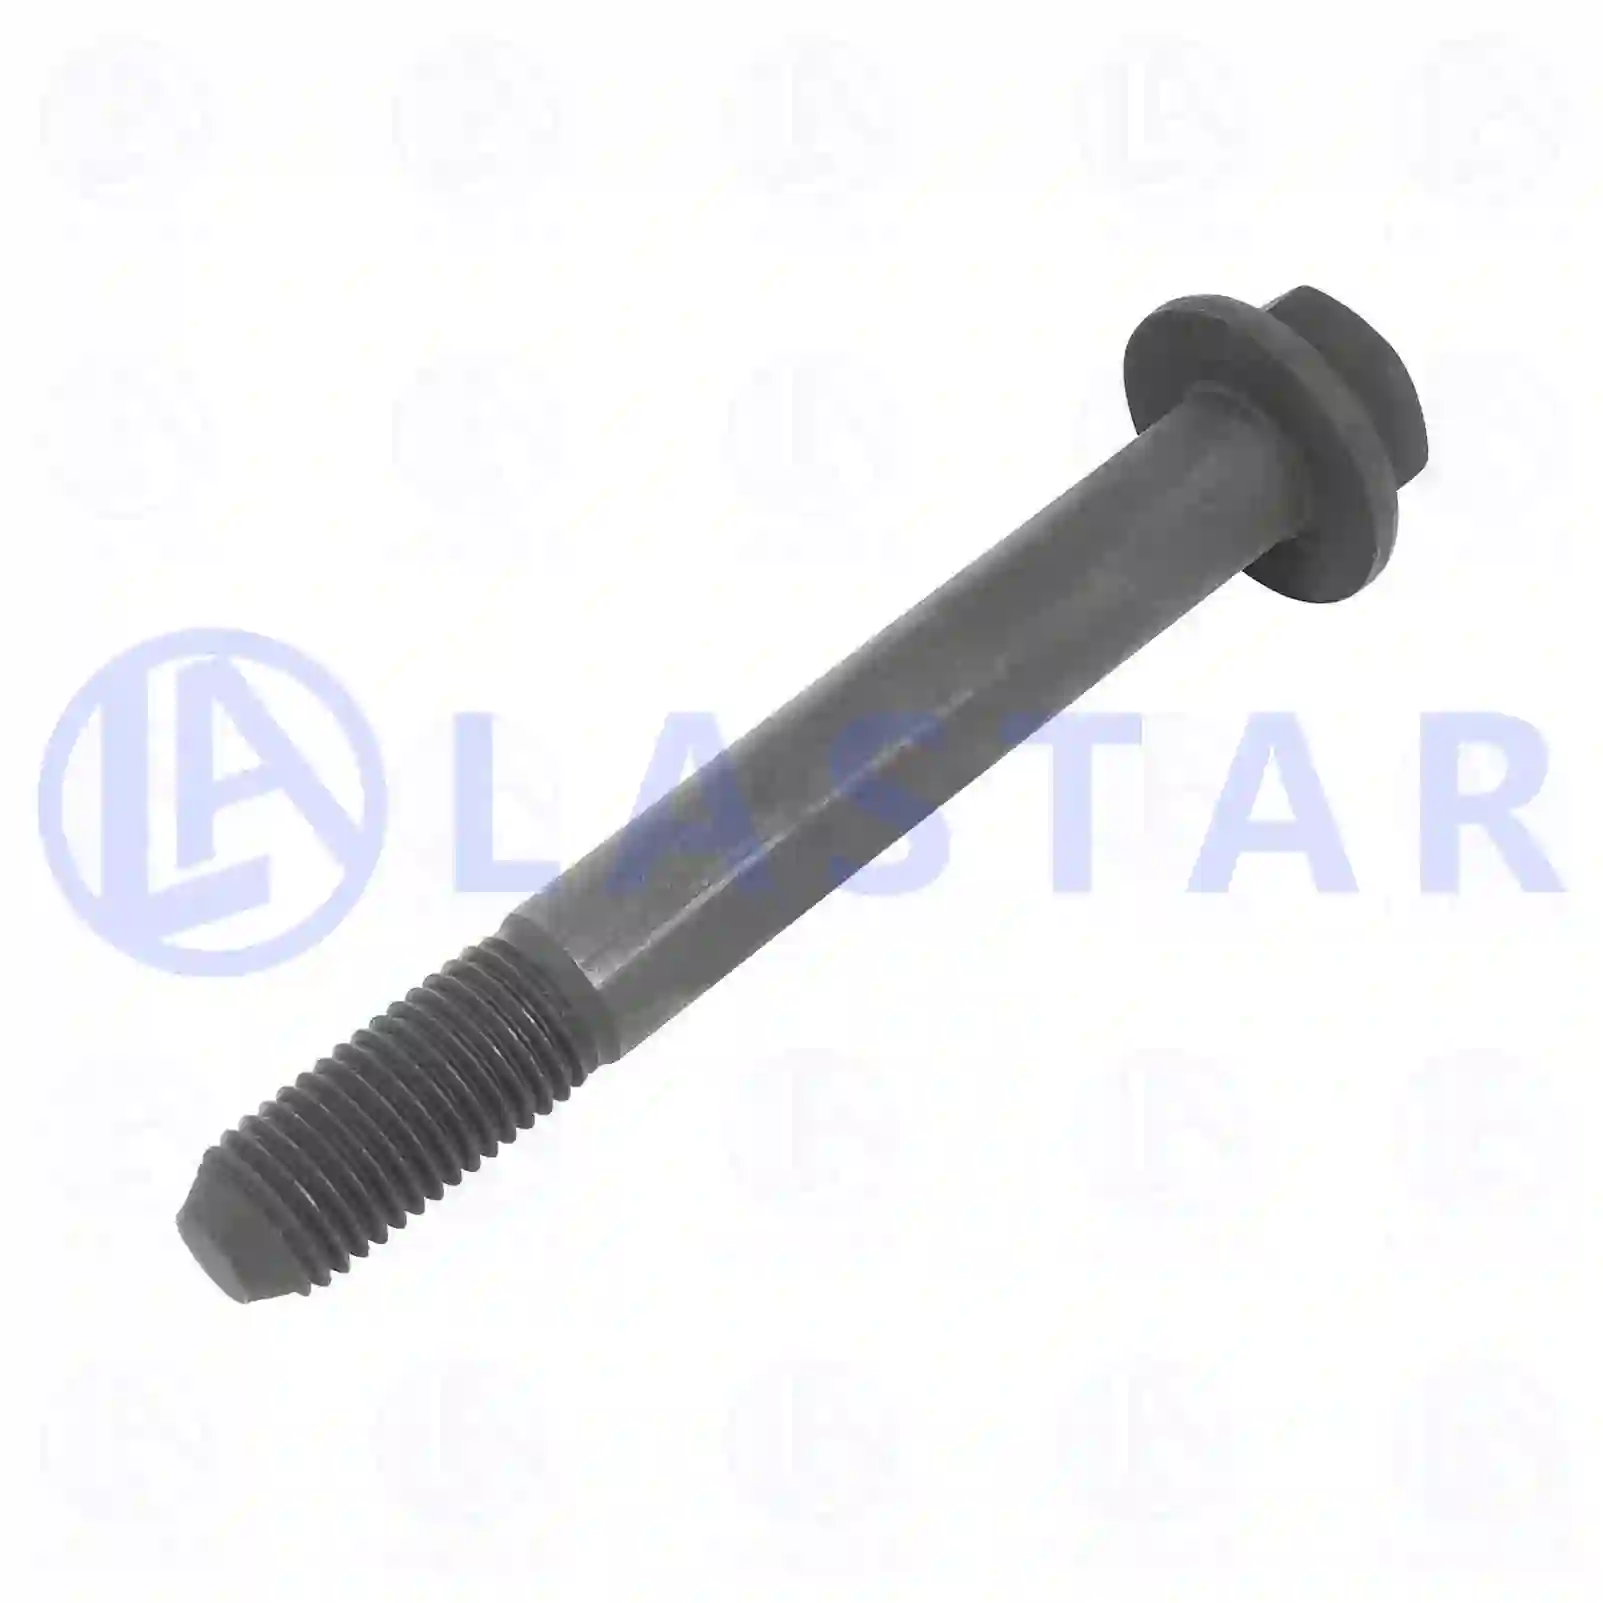 Screw, 77729502, 20467714, 20883938, 21662526, ZG41494-0008, ||  77729502 Lastar Spare Part | Truck Spare Parts, Auotomotive Spare Parts Screw, 77729502, 20467714, 20883938, 21662526, ZG41494-0008, ||  77729502 Lastar Spare Part | Truck Spare Parts, Auotomotive Spare Parts